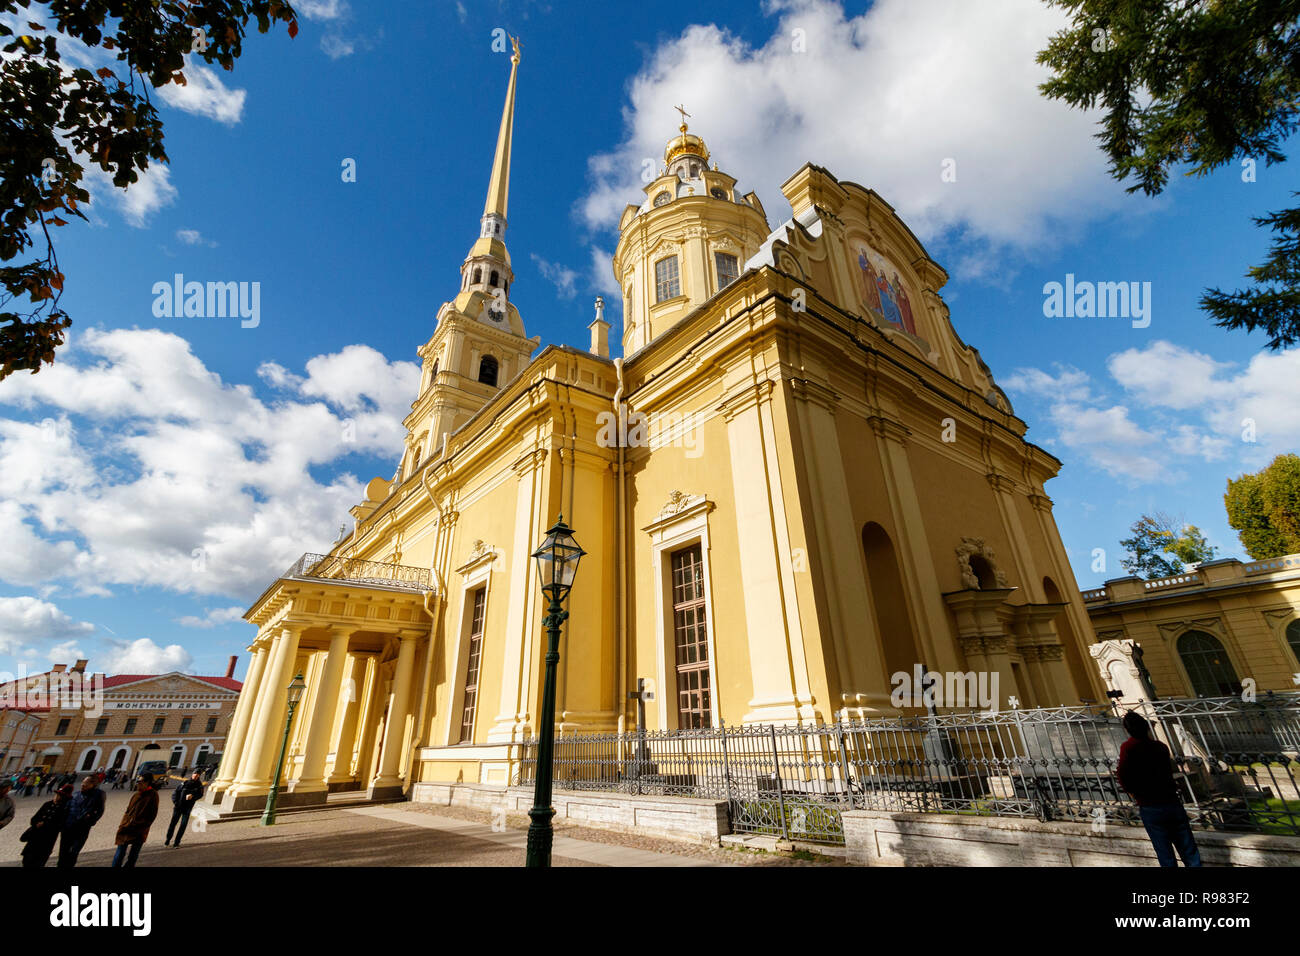 The Saints Peter and Paul Cathedral, inside the Peter and Paul Fortress in St Petersburg, Russia. Russian Orthodox. From a design ny Domenico Trezzini Stock Photo